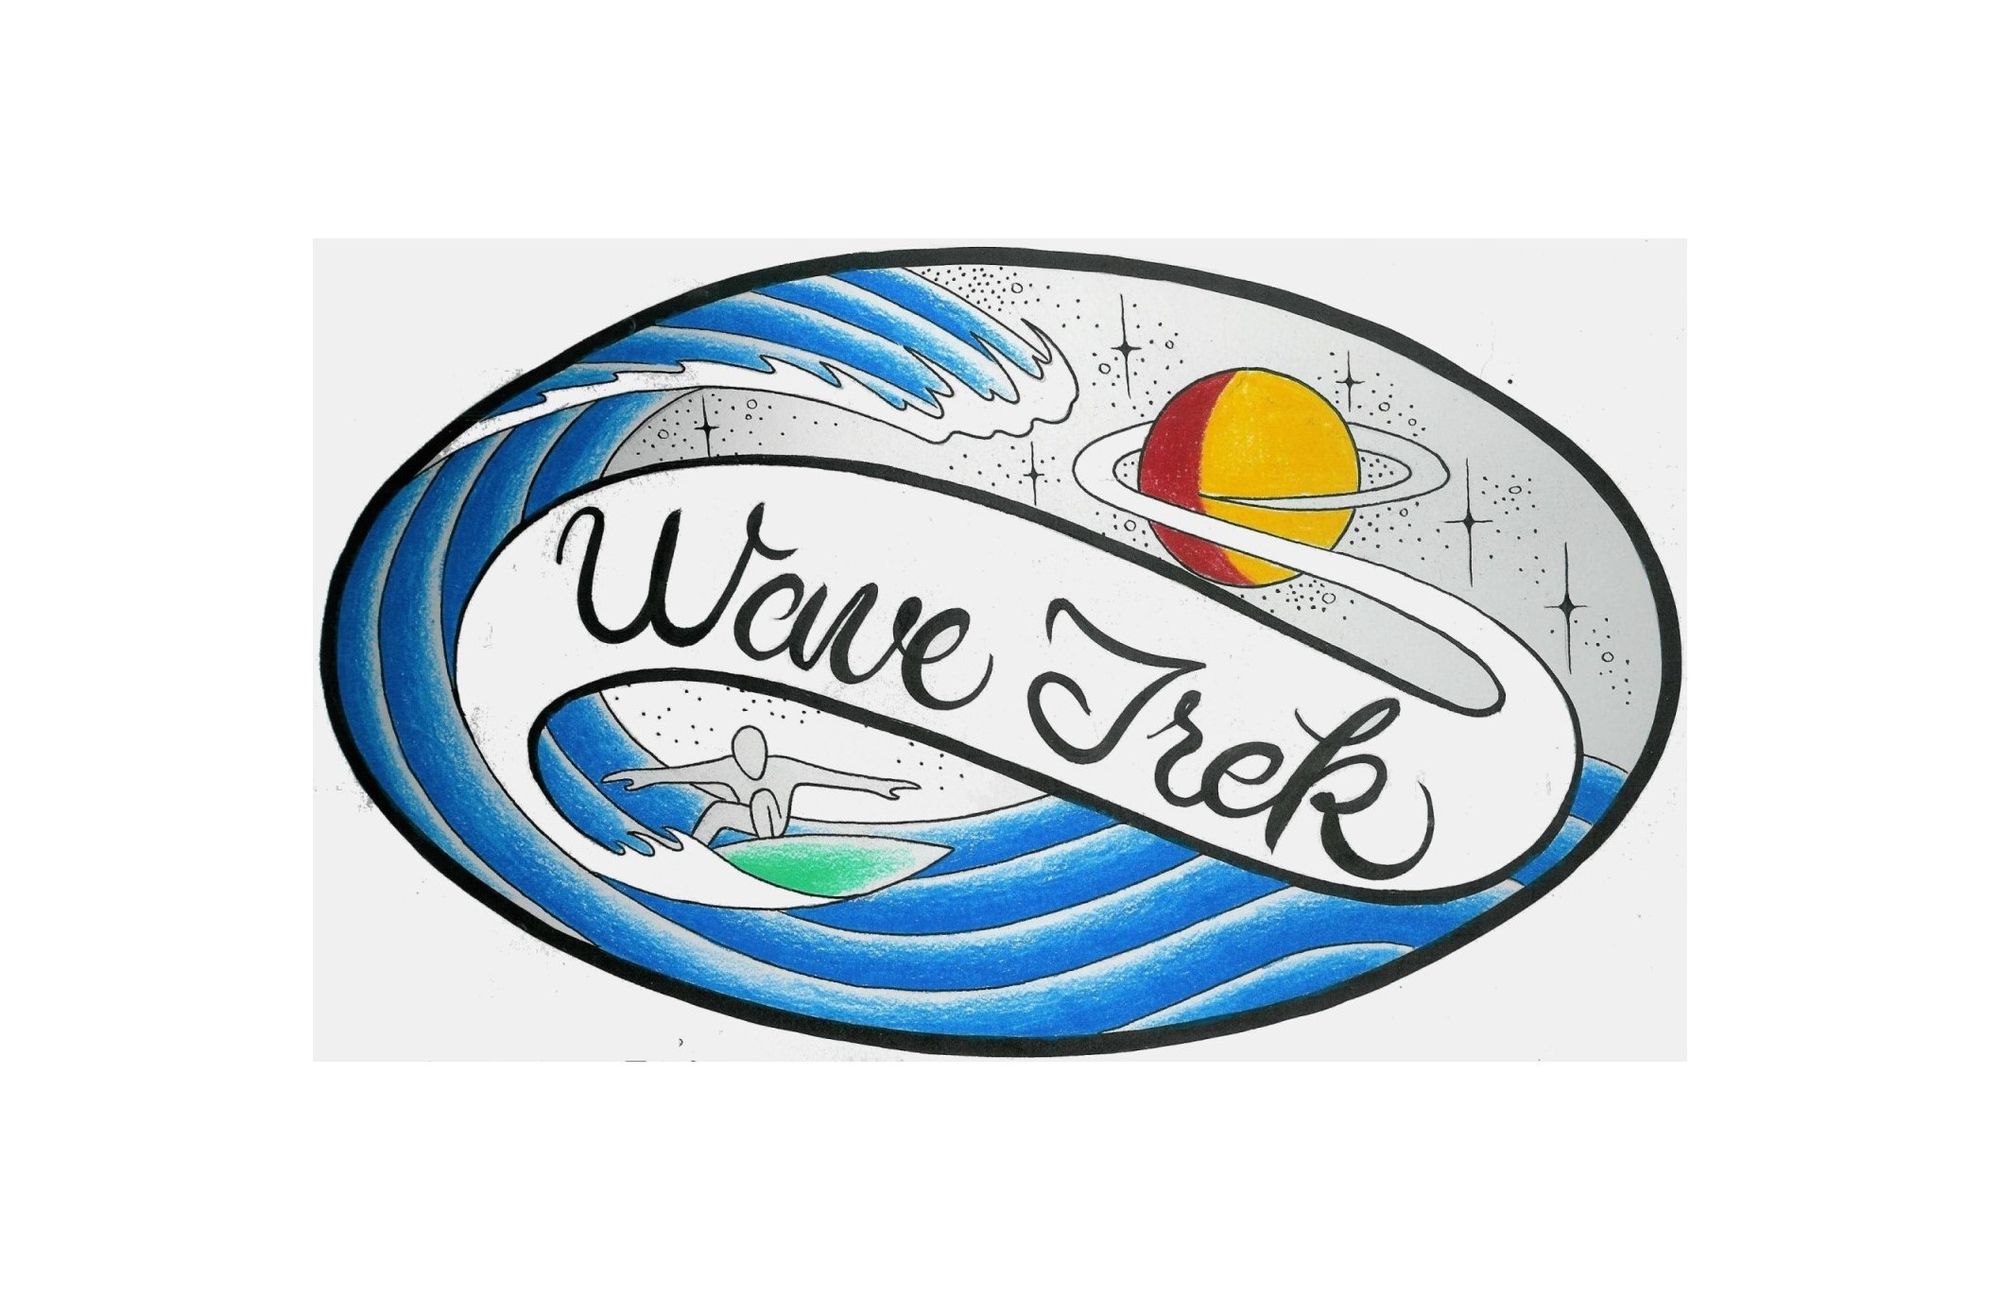 Keep Riding the Waves - Wave Trek Surfboards